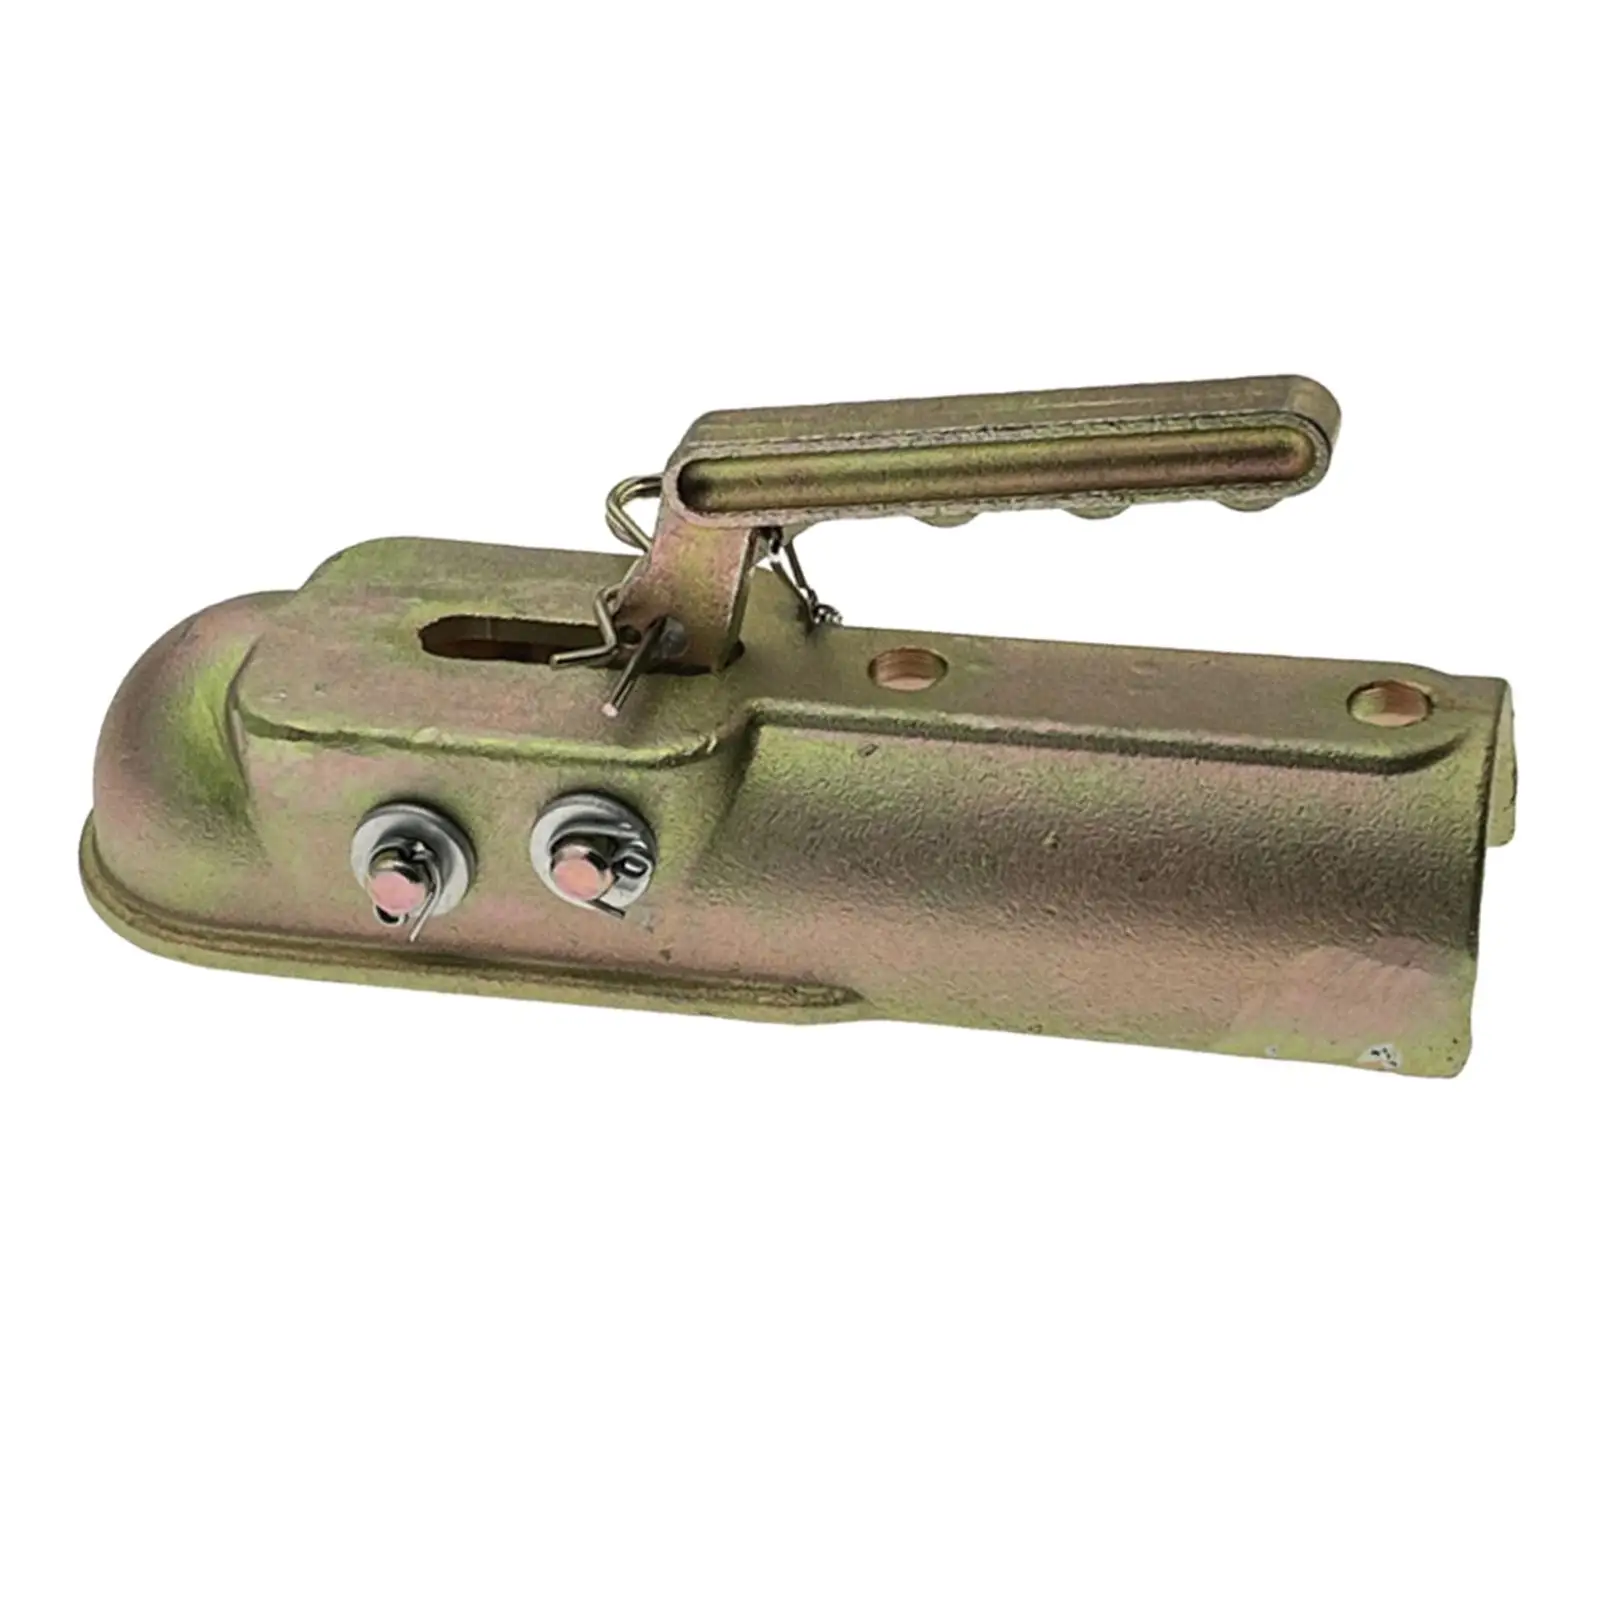 Straight Trailer Coupler Accessory for Camper Convenient Installation